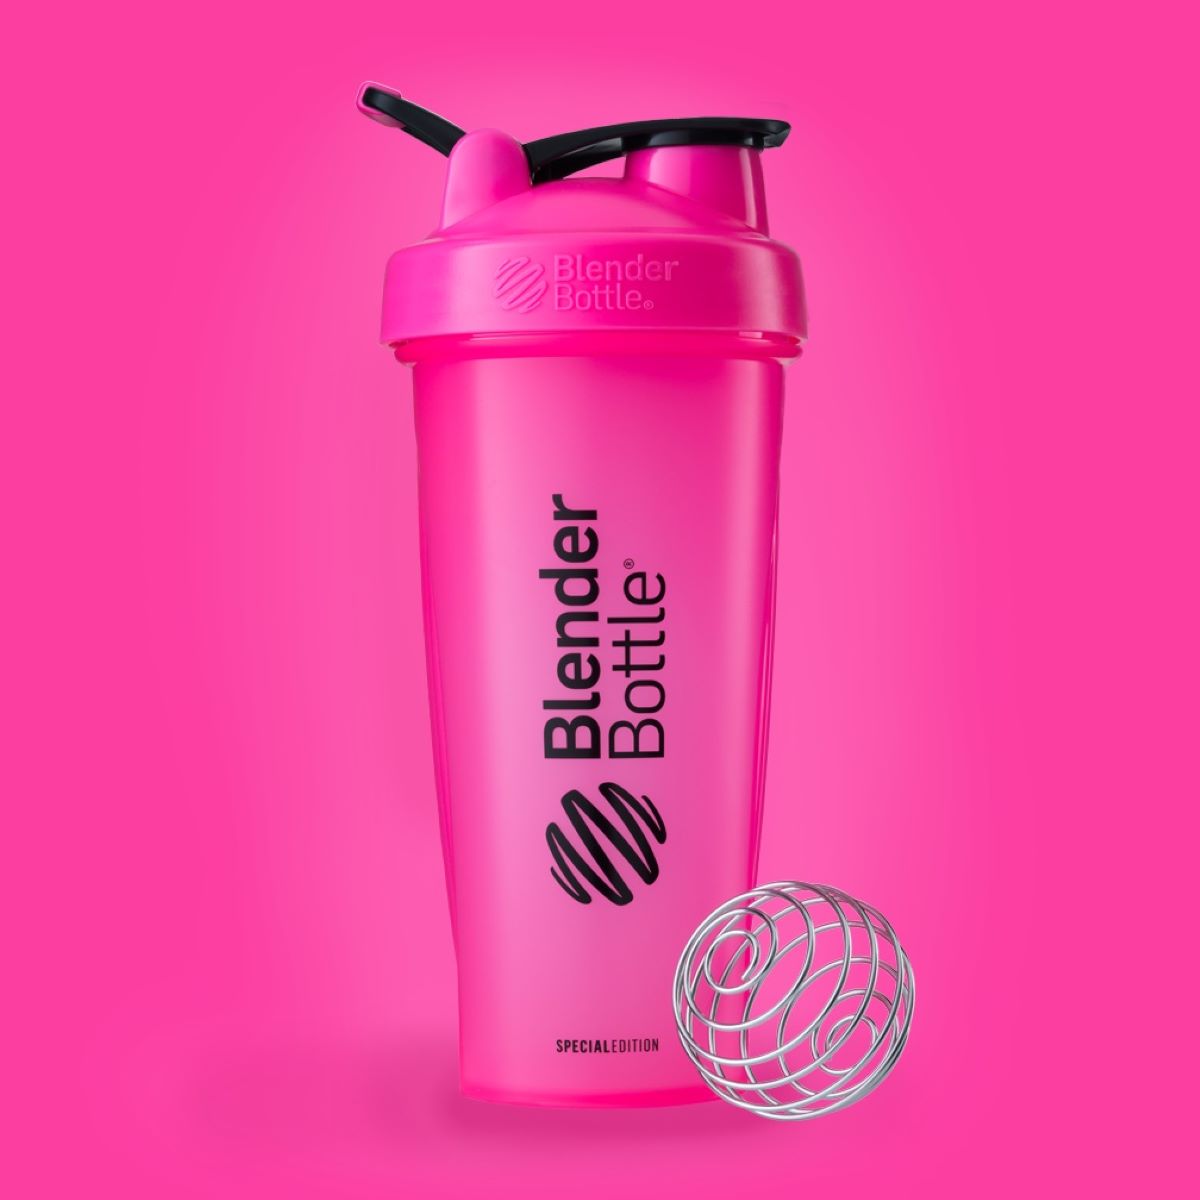 BlenderBottle Shaker Bottle with Pill Organizer and Storage for Protein  Powder, ProStak System, 22-Ounce, Rose Pink